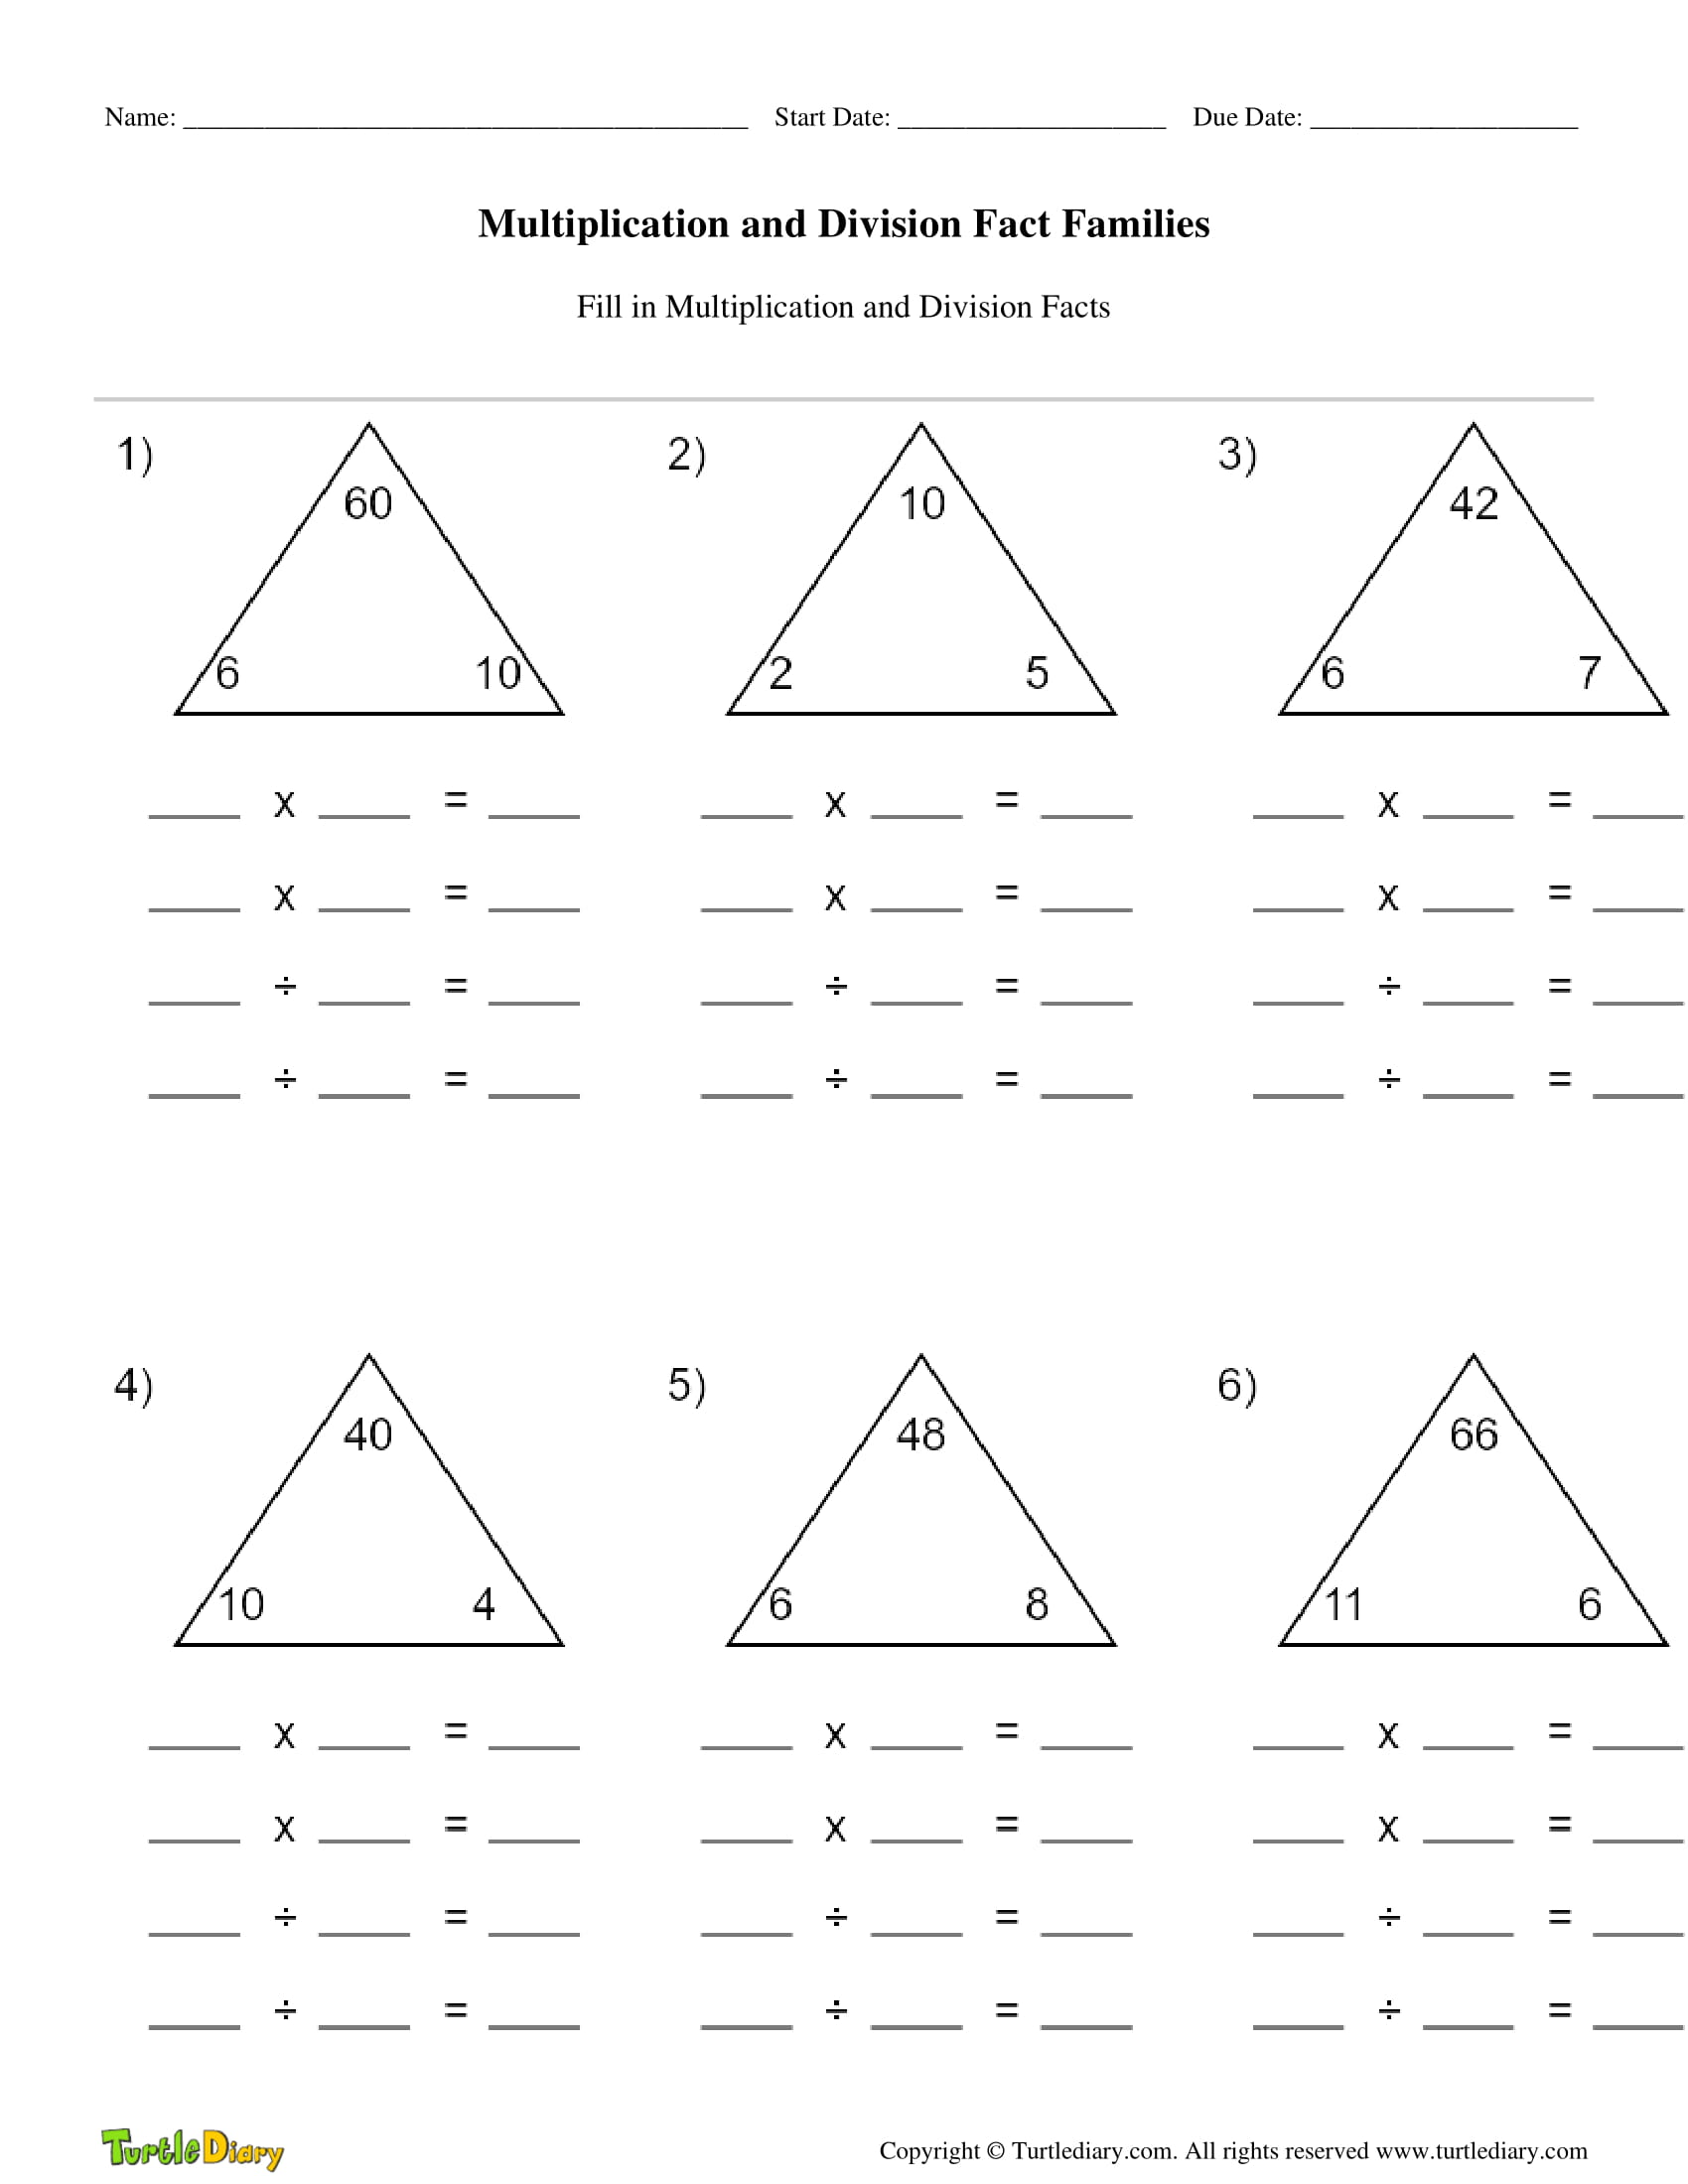 free-printable-multiplication-division-fact-family-worksheets-printable-templates